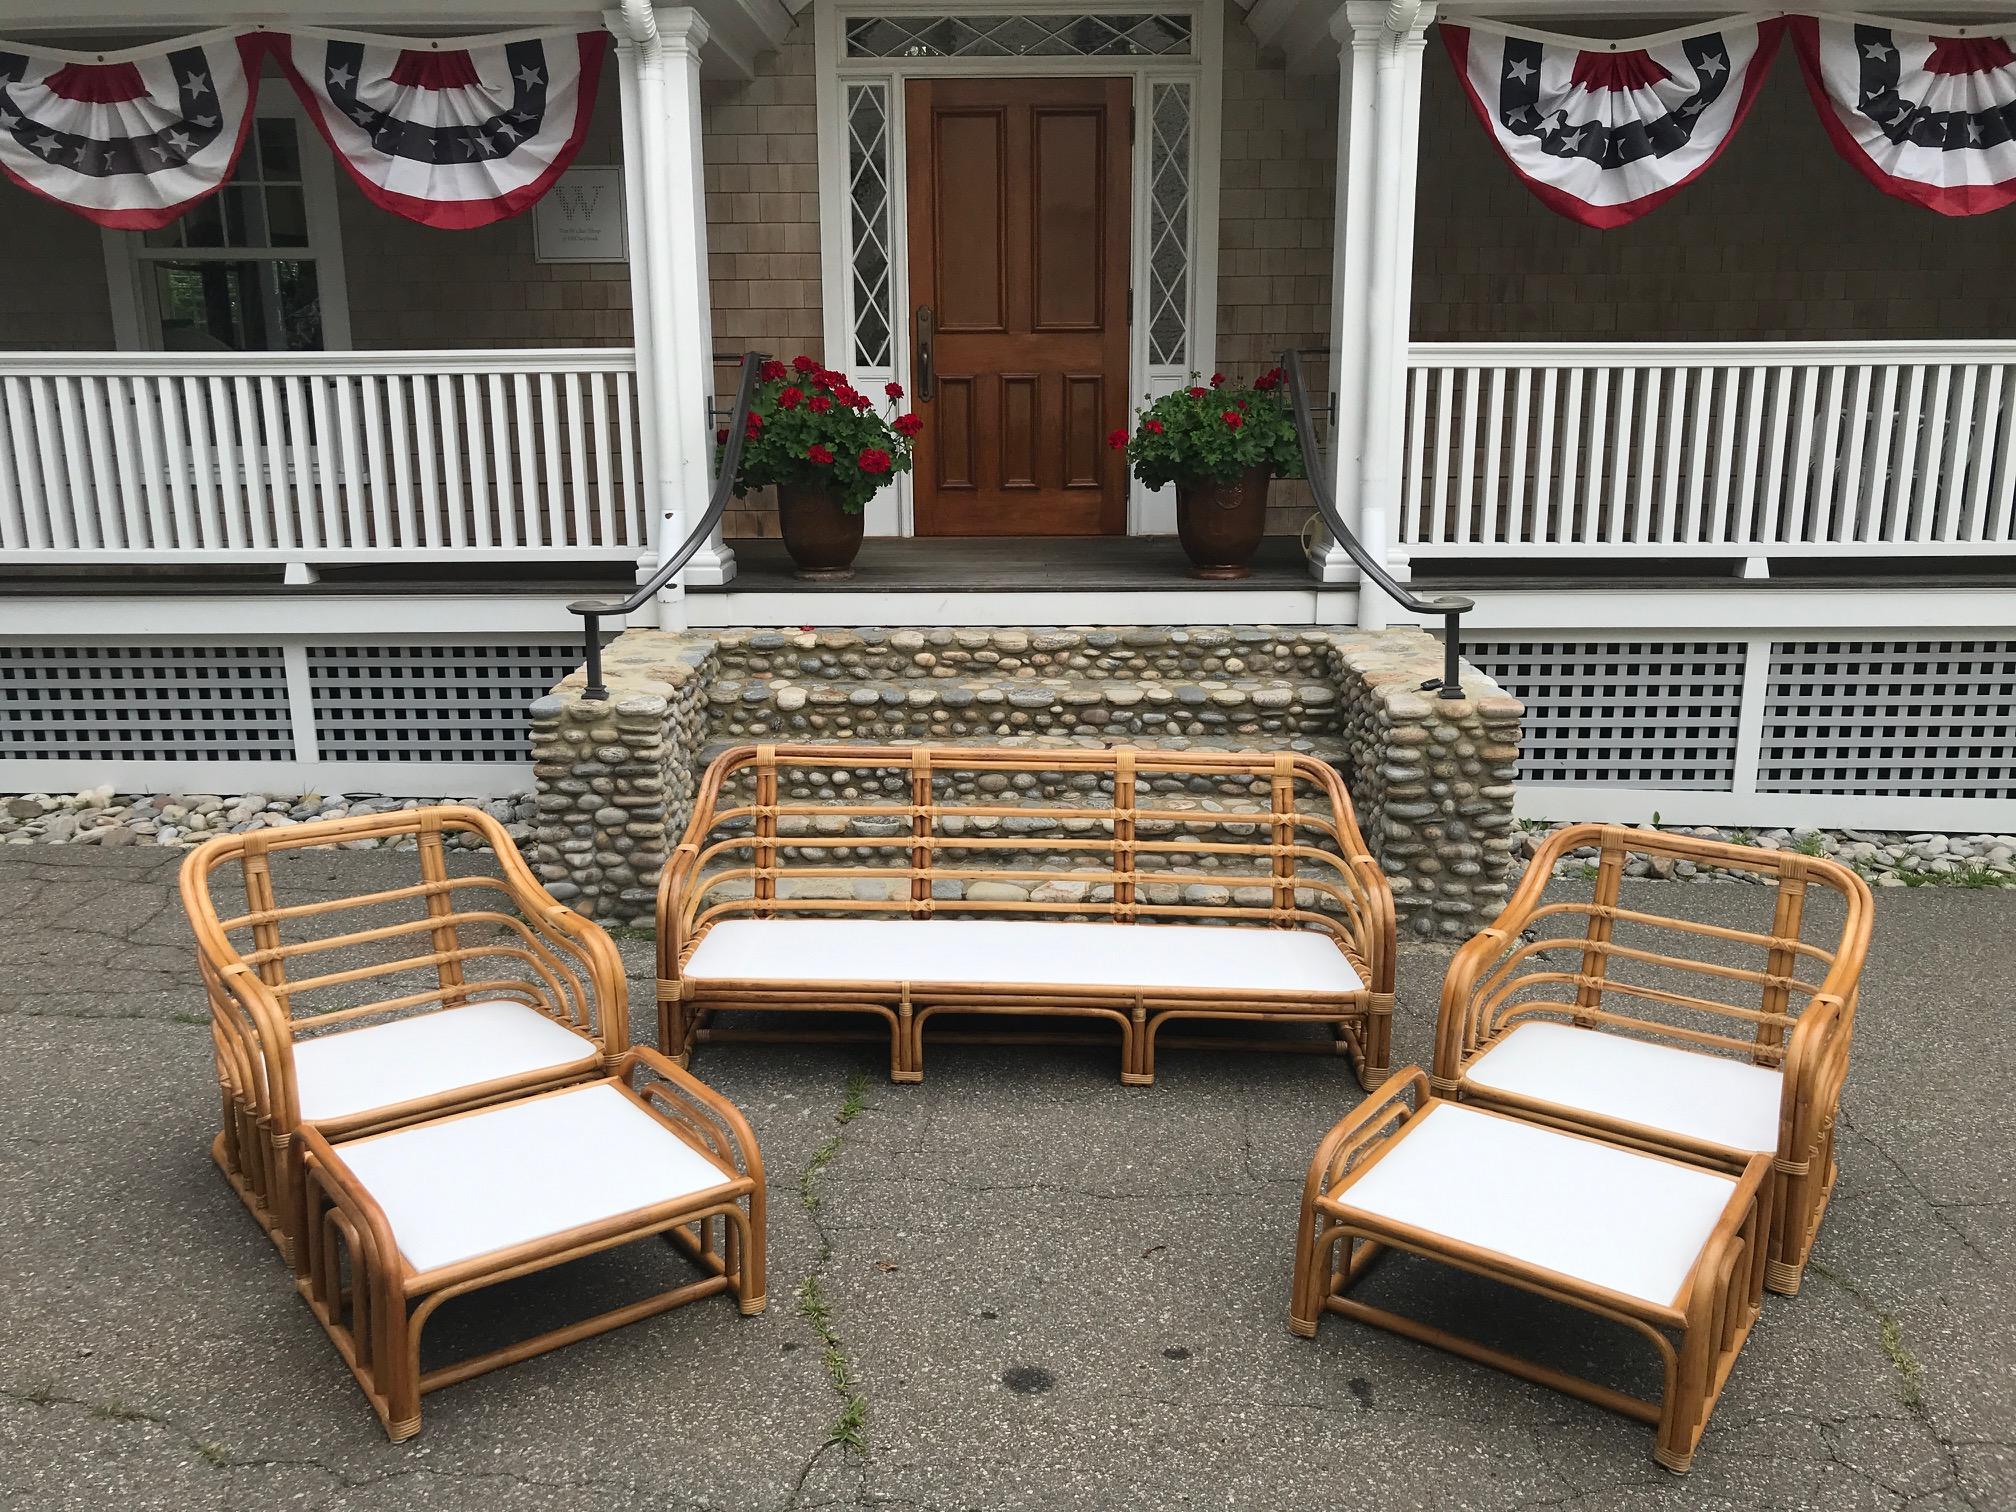 Beautiful vintage, five piece Brown Jordan Rattan patio set comprised of a sofa, two lounge chairs and two ottomans. All pieces have clean white decking and are ready for your custom cushions which we can provide locally before shipment of the